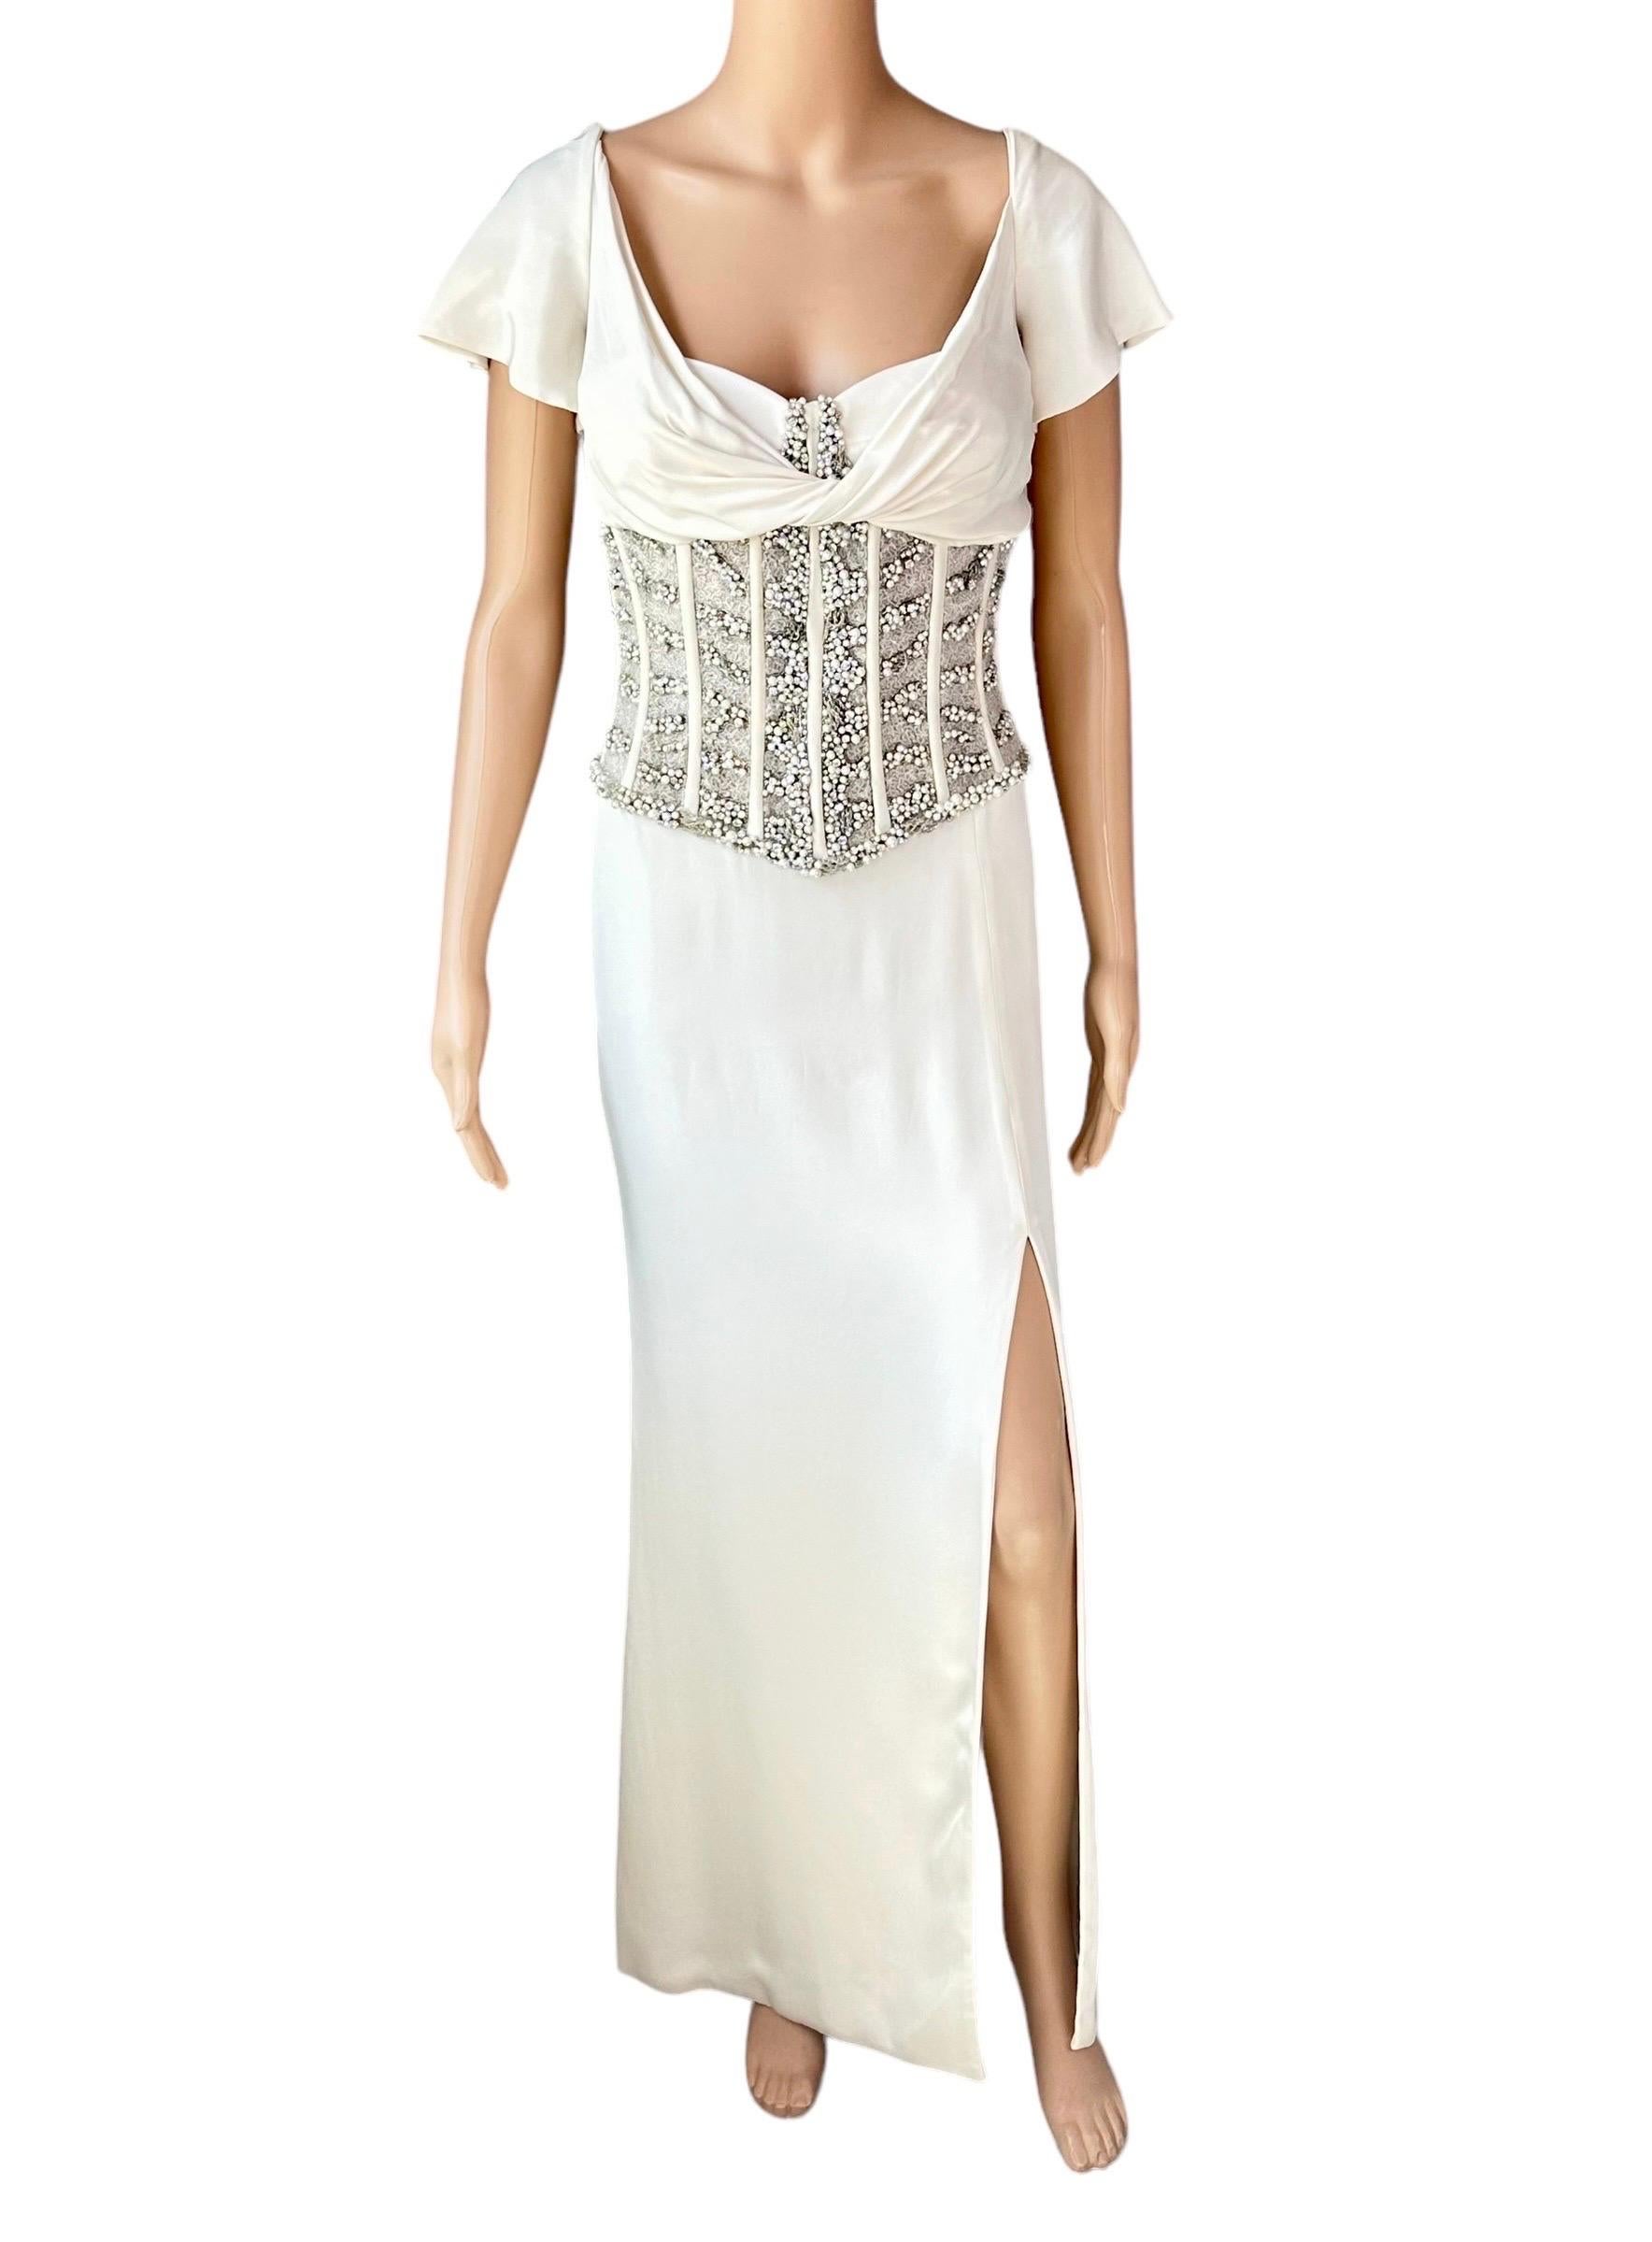 Roberto Cavalli Embellished Corset Empire Silhouette Evening Dress Gown For Sale 2